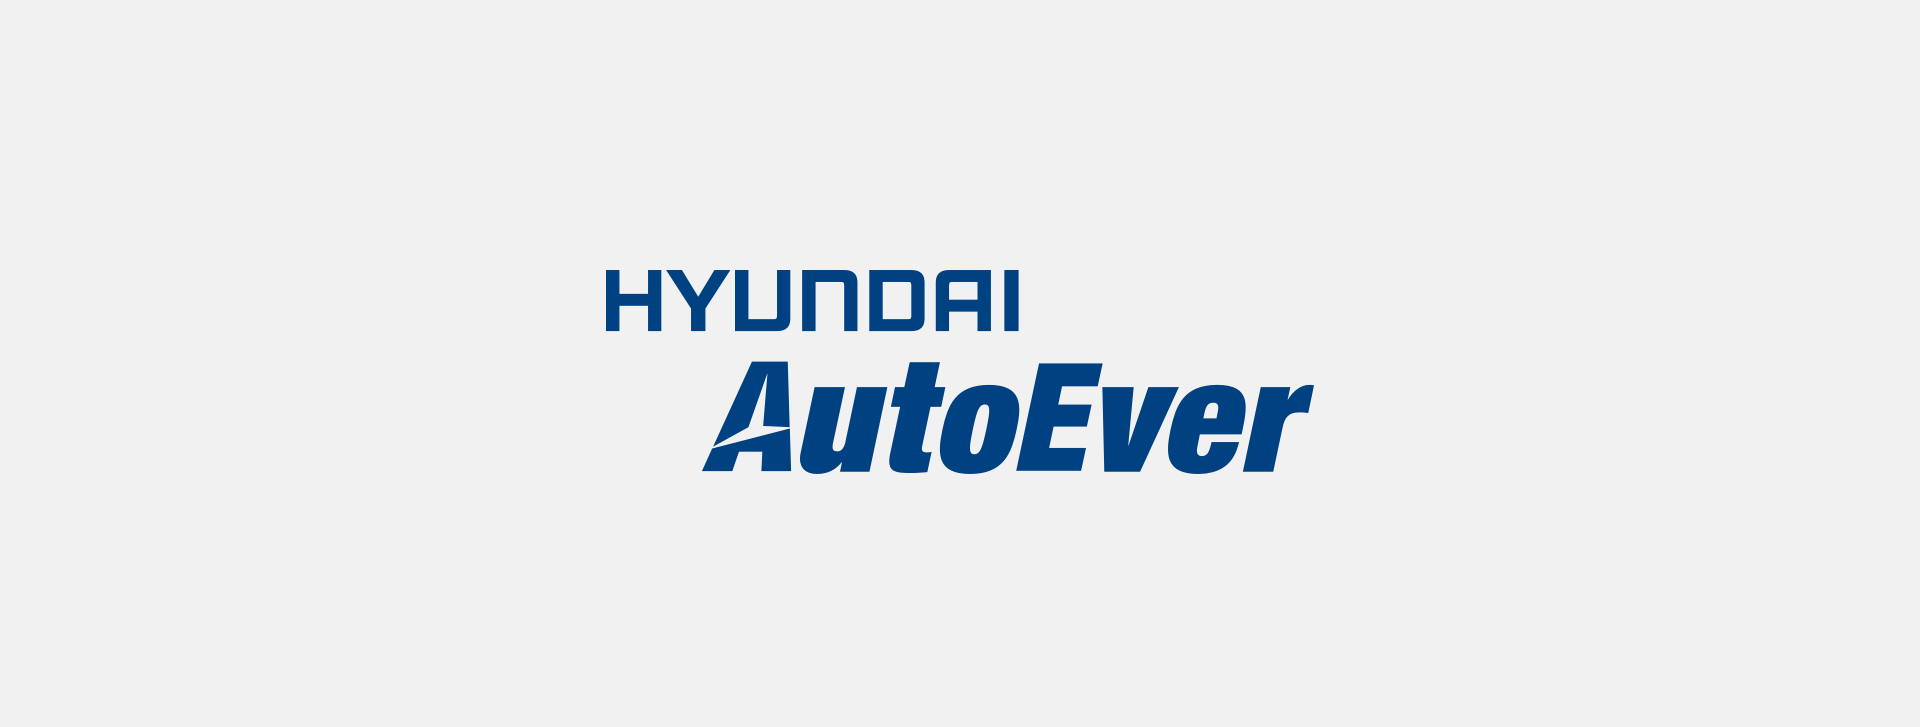 Hyundai AutoEver attains Level 3 cybersecurity certification